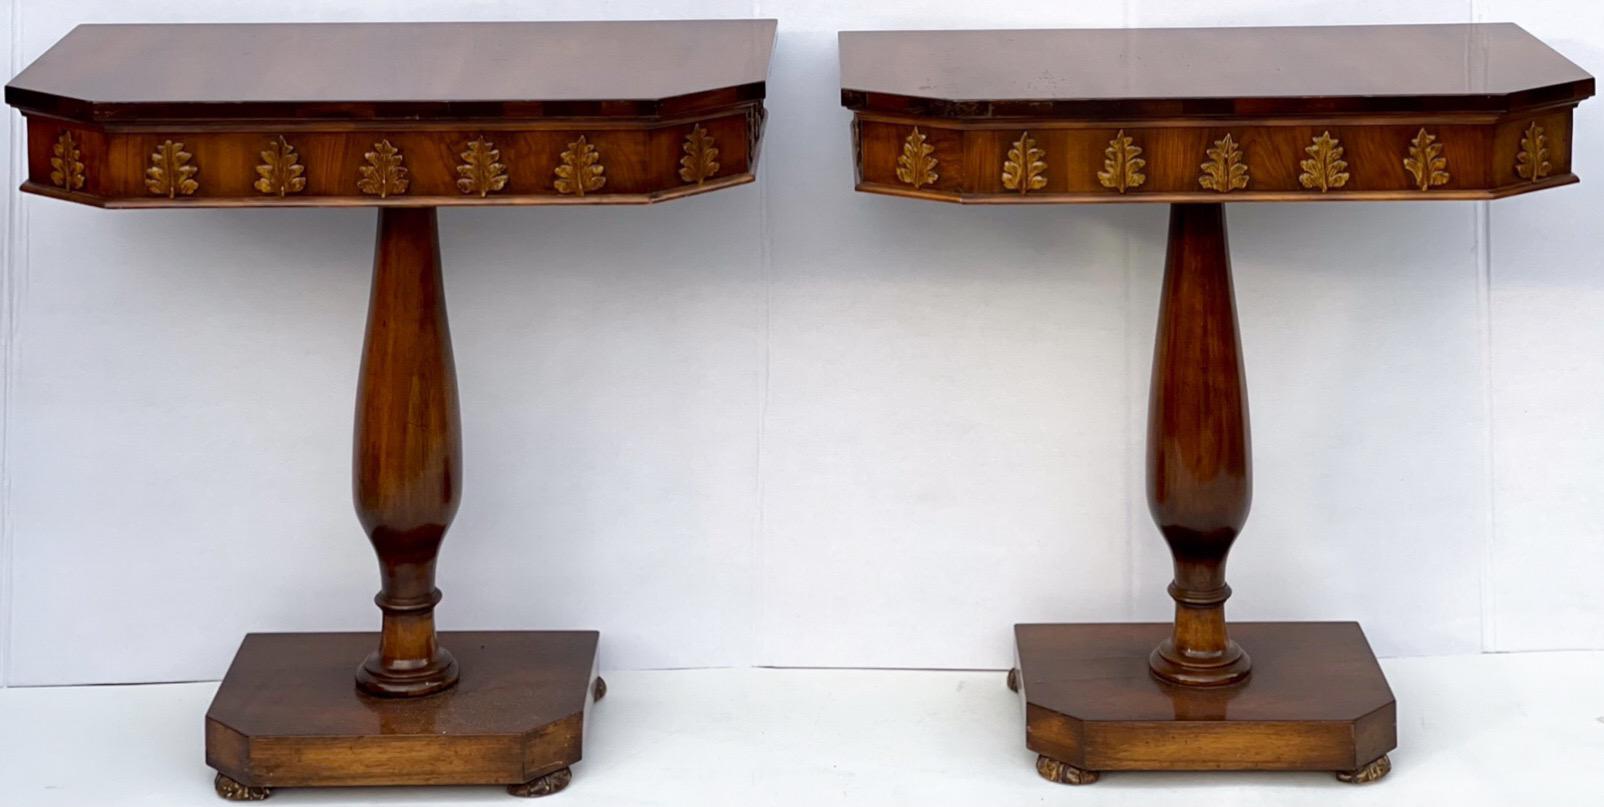 This is a lovely pair of Regency style carved walnut and gilt console tables. The aprons have carved acanthus leaves. The bun feet are nicely carved as well. Nice versatile size!